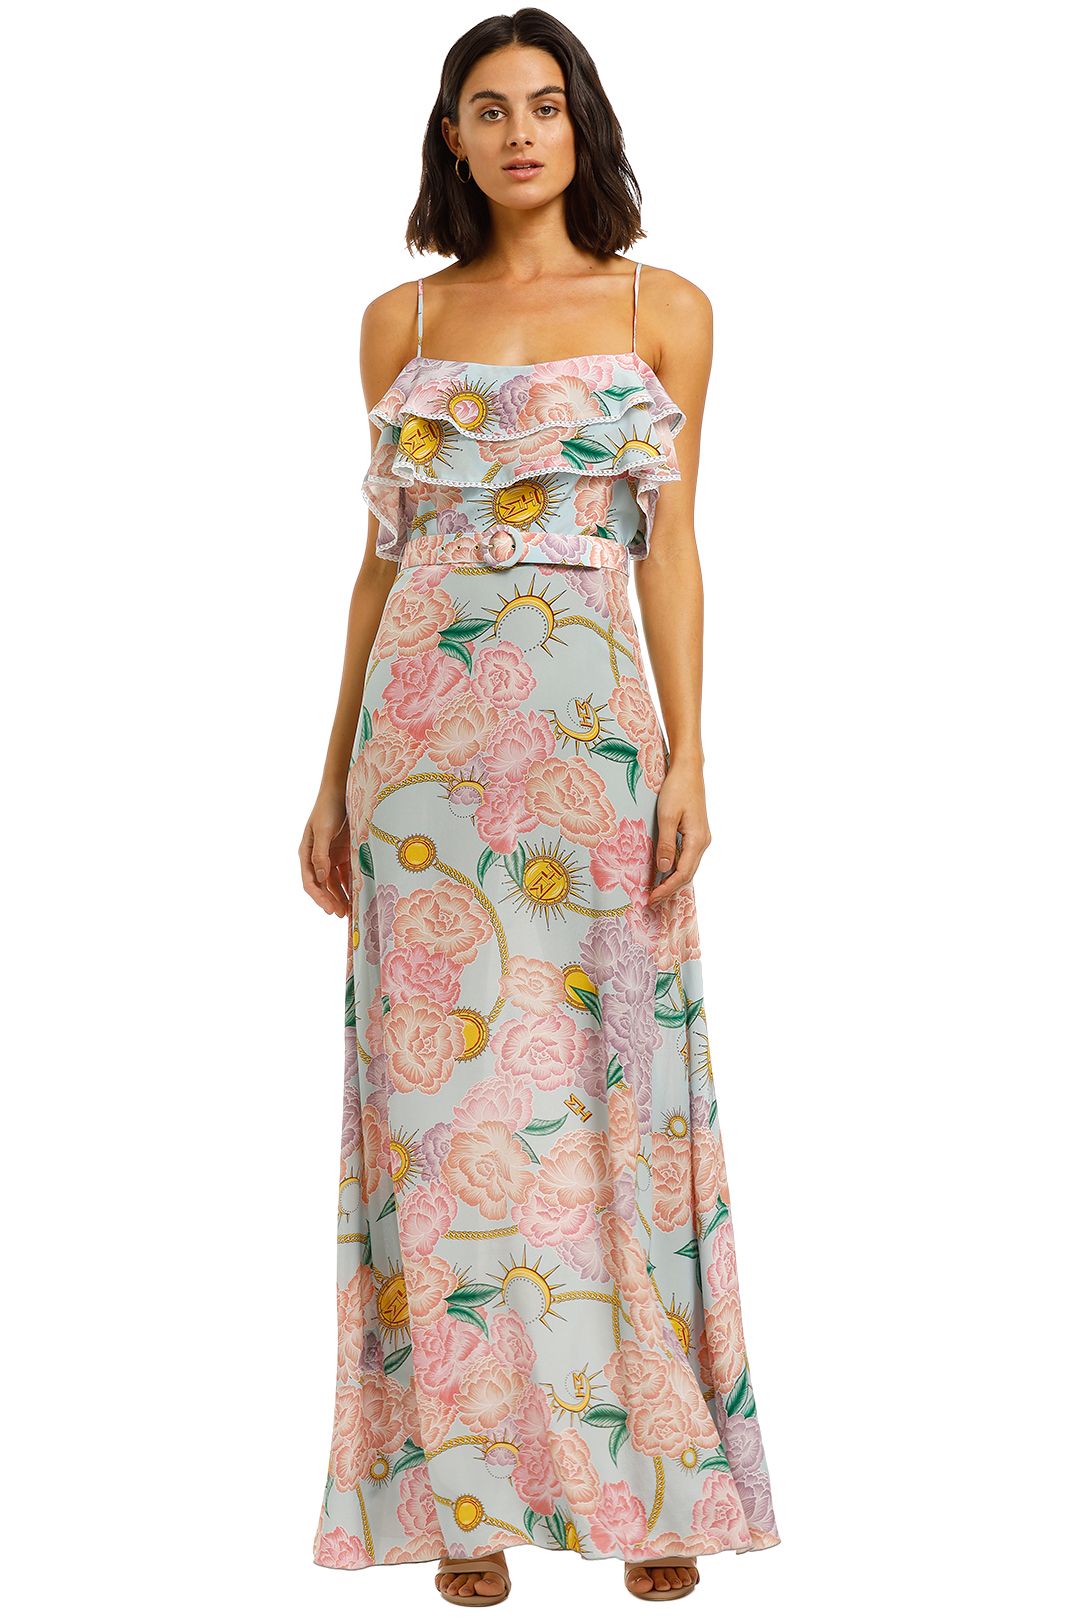 Hayley-Menzies-Maxi-Frill-Dress-Floral-Print-Front